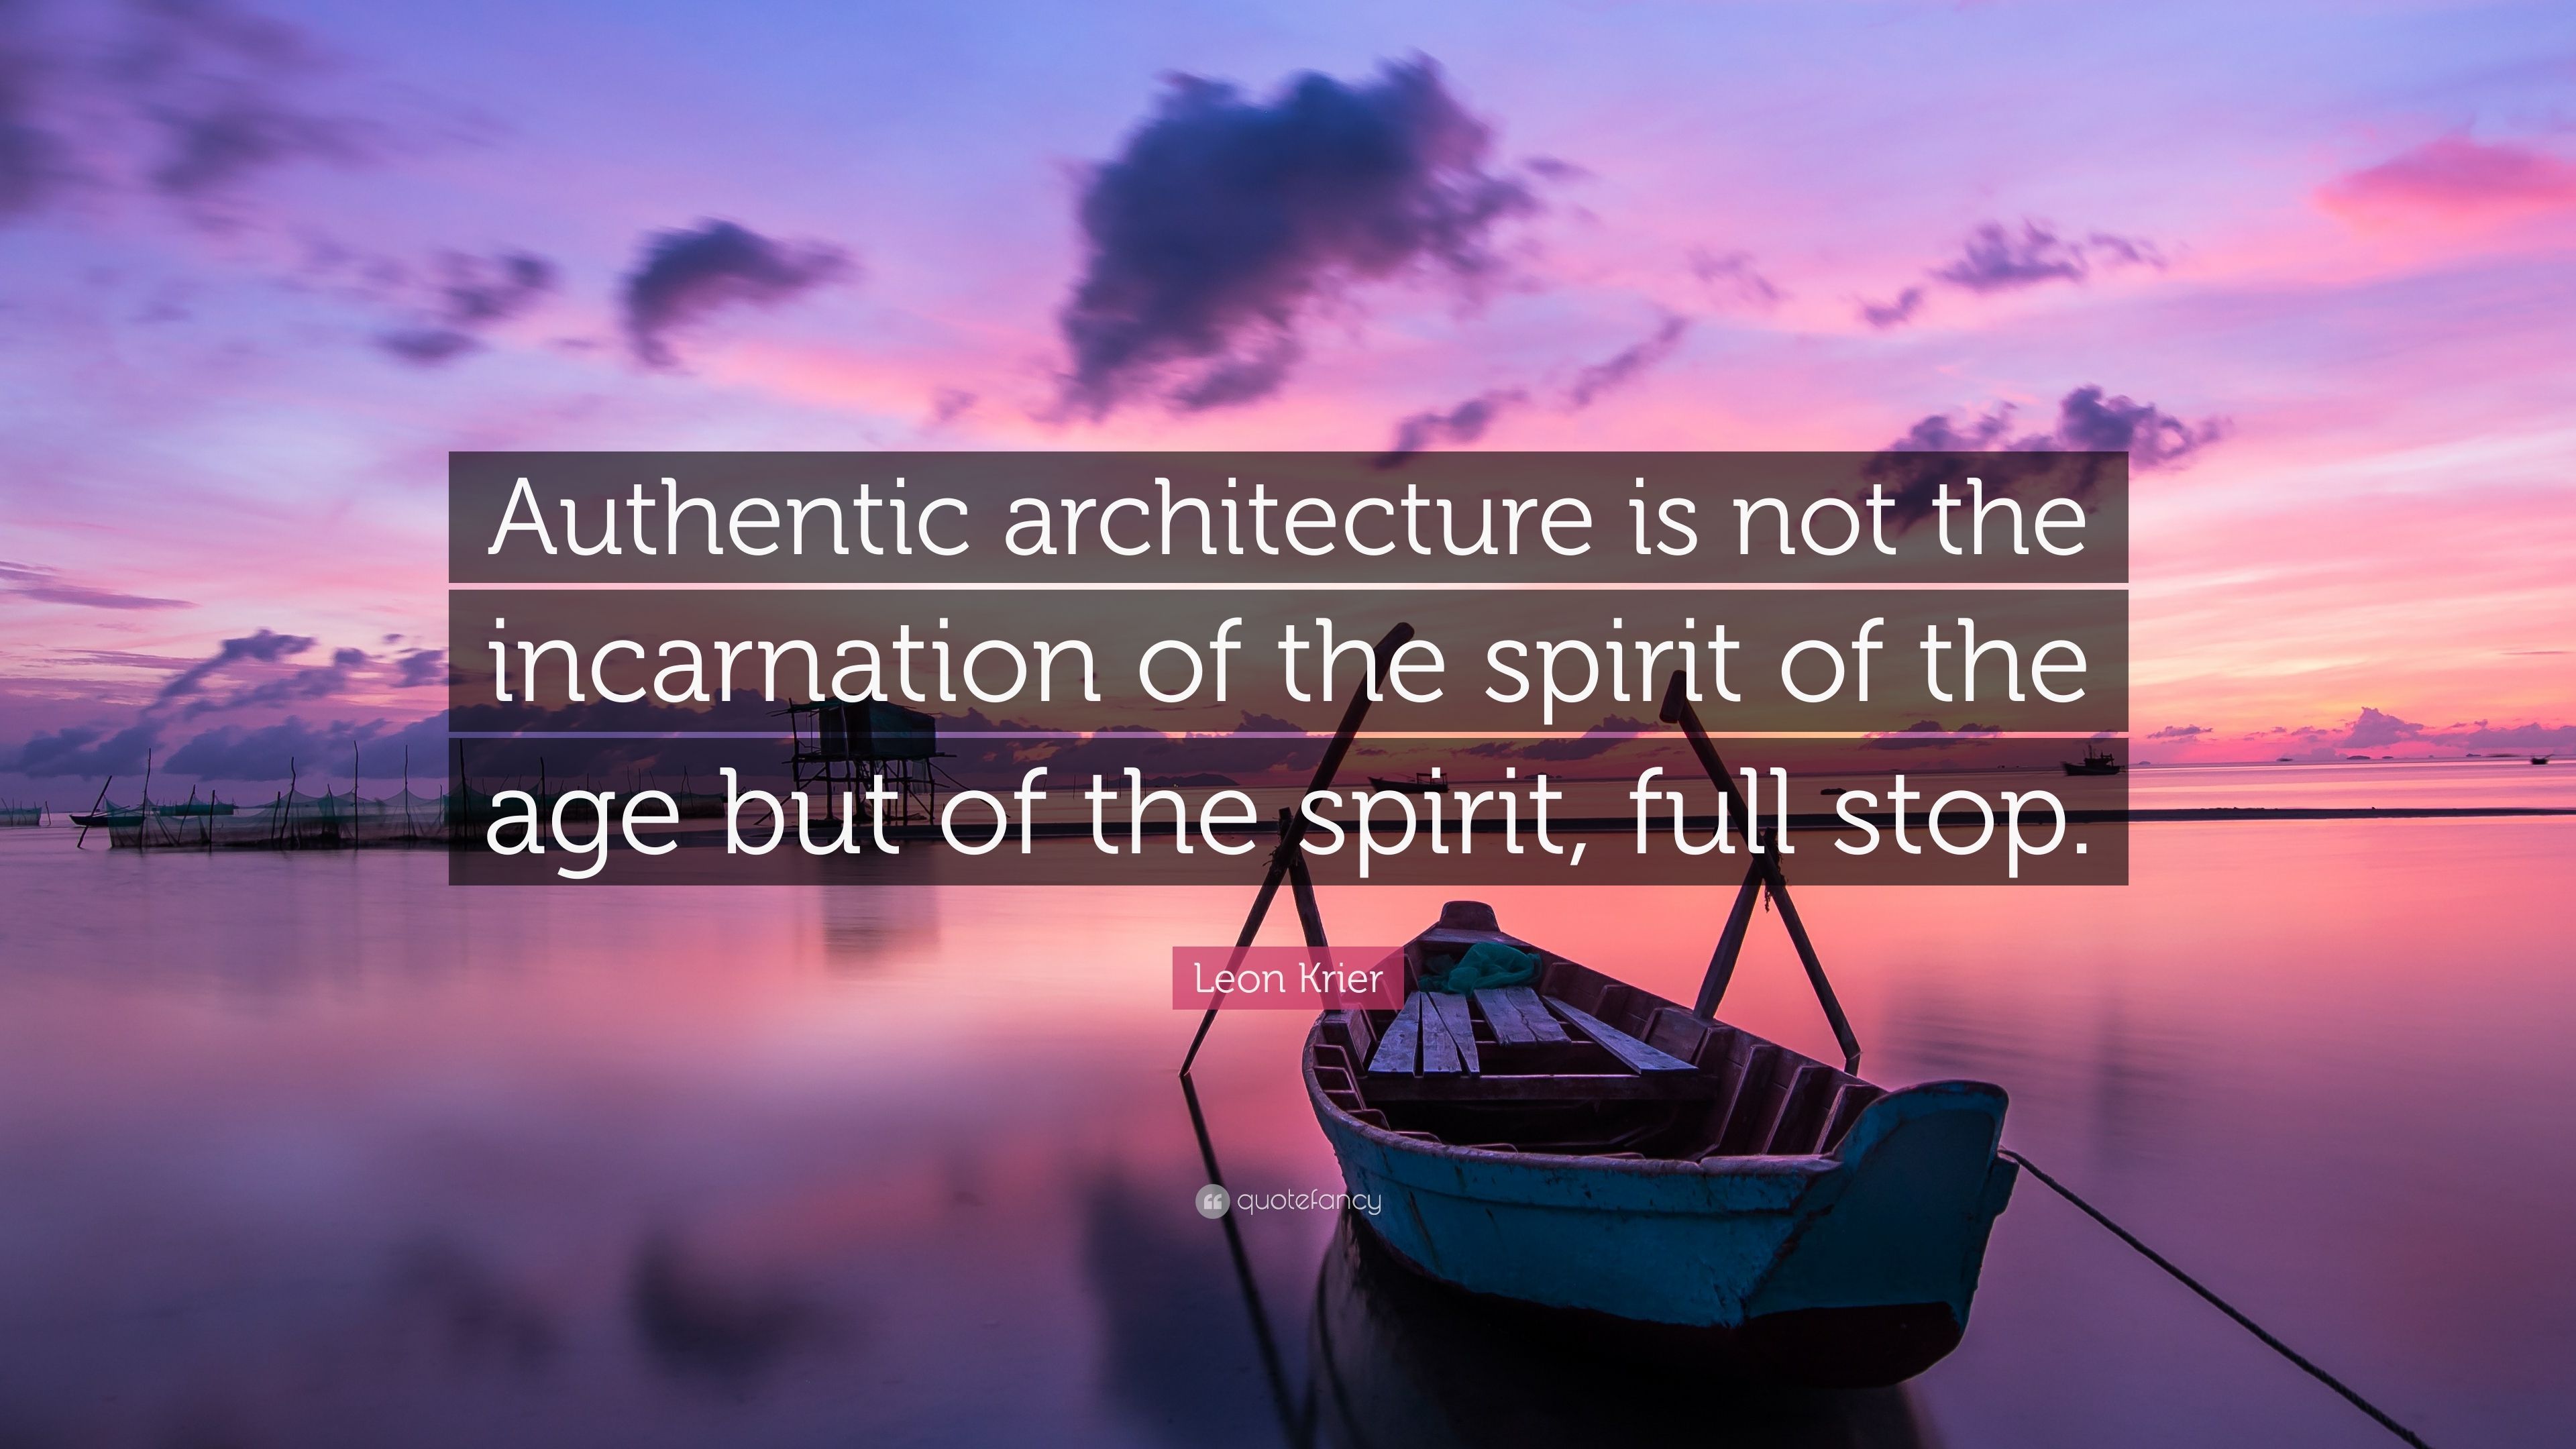 Leon Krier Quote: “Authentic architecture is not the incarnation